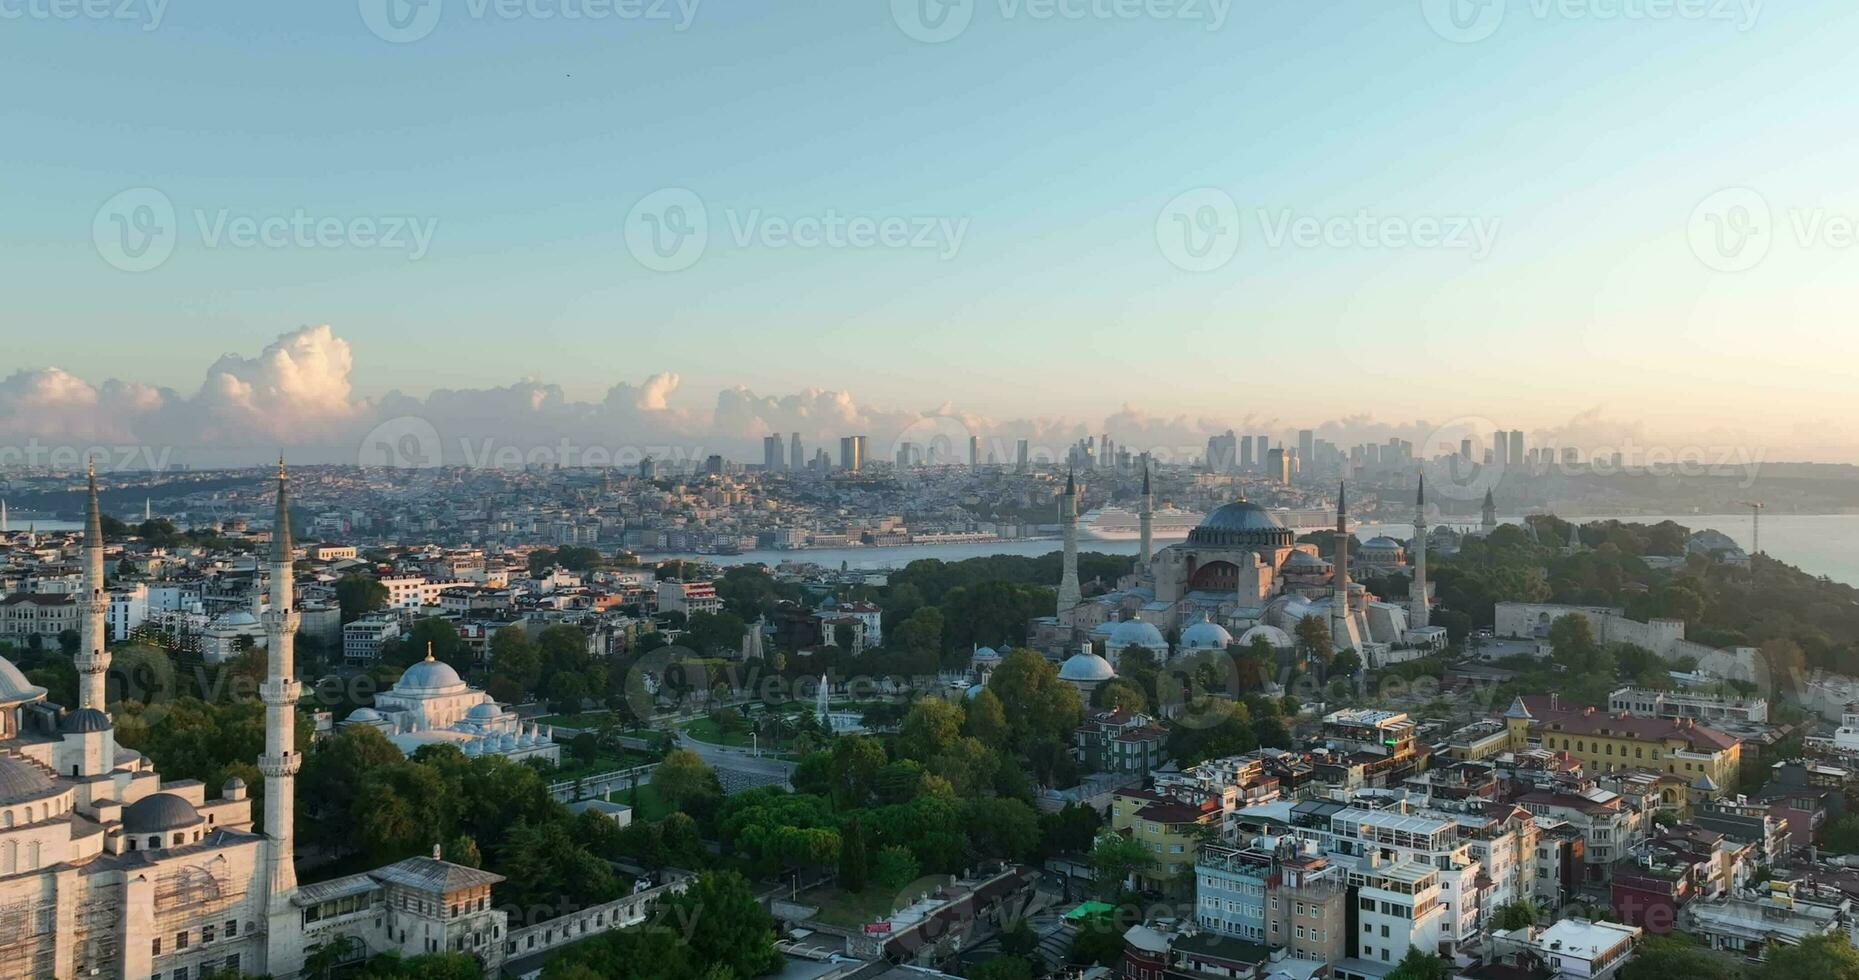 Istanbul, Turkey. Sultanahmet with the Blue Mosque and the Hagia Sophia with a Golden Horn on the background at sunrise. Cinematic Aerial view. photo